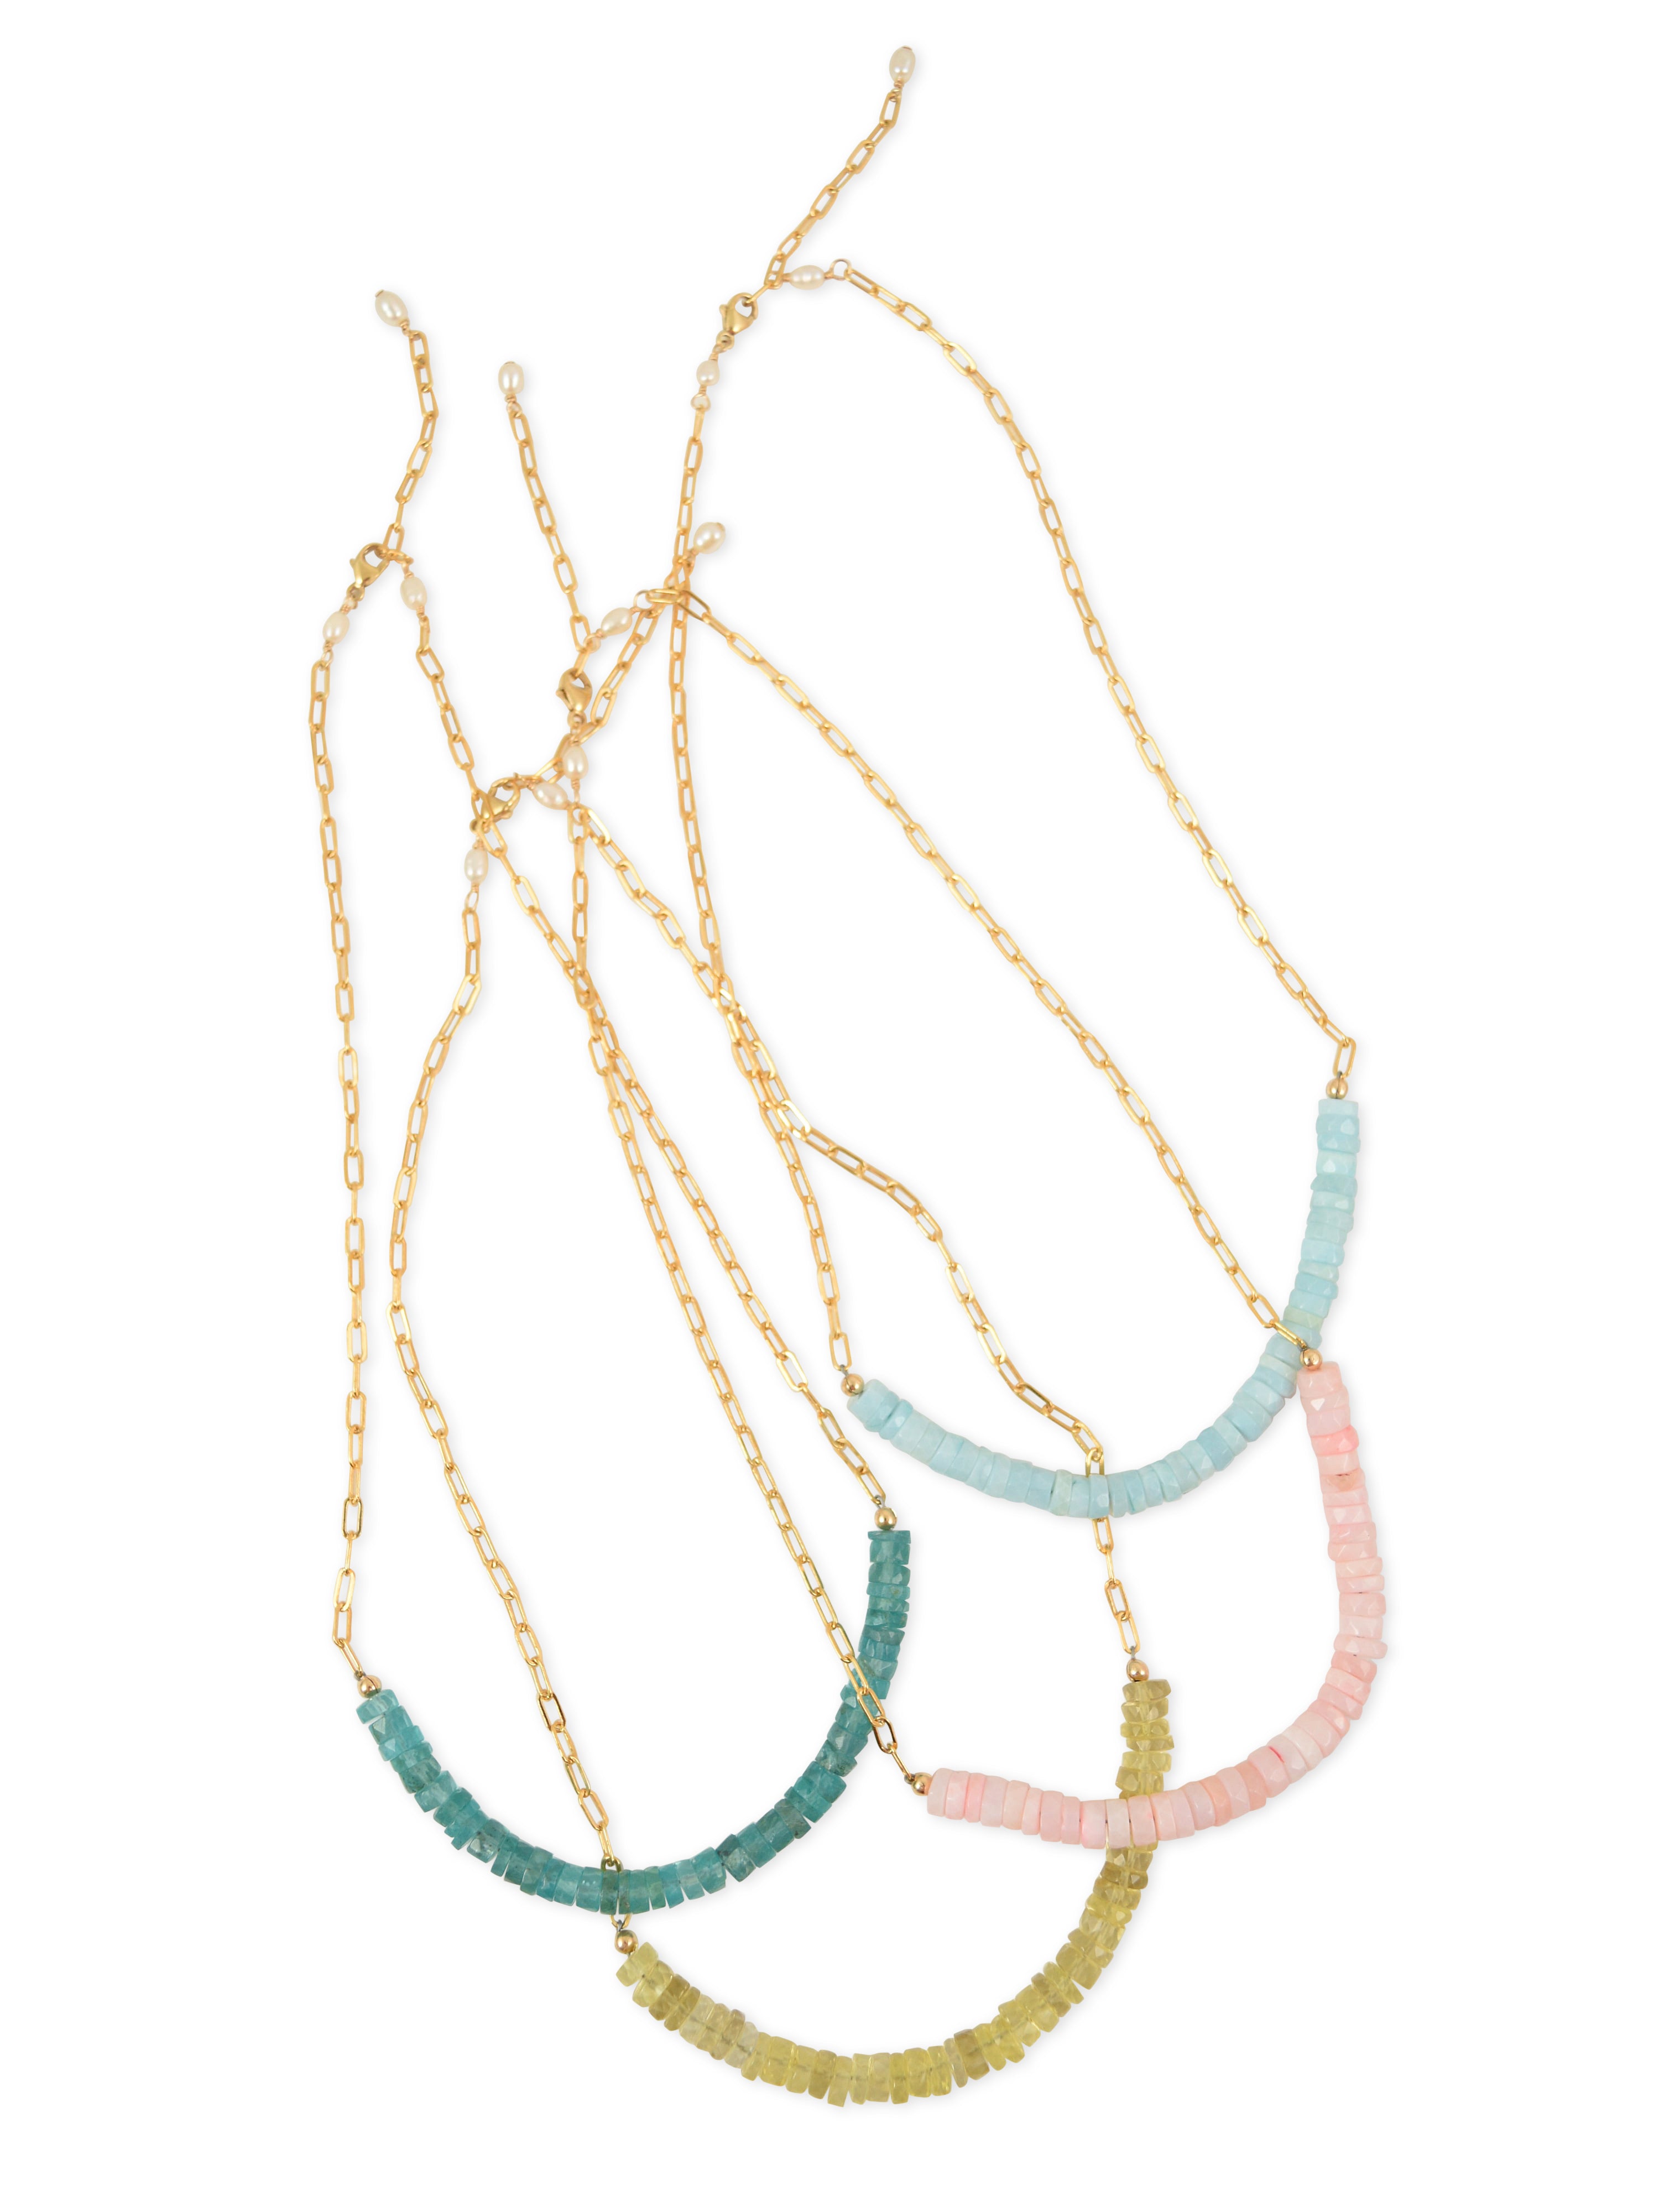 Bailee Necklace in Apatite